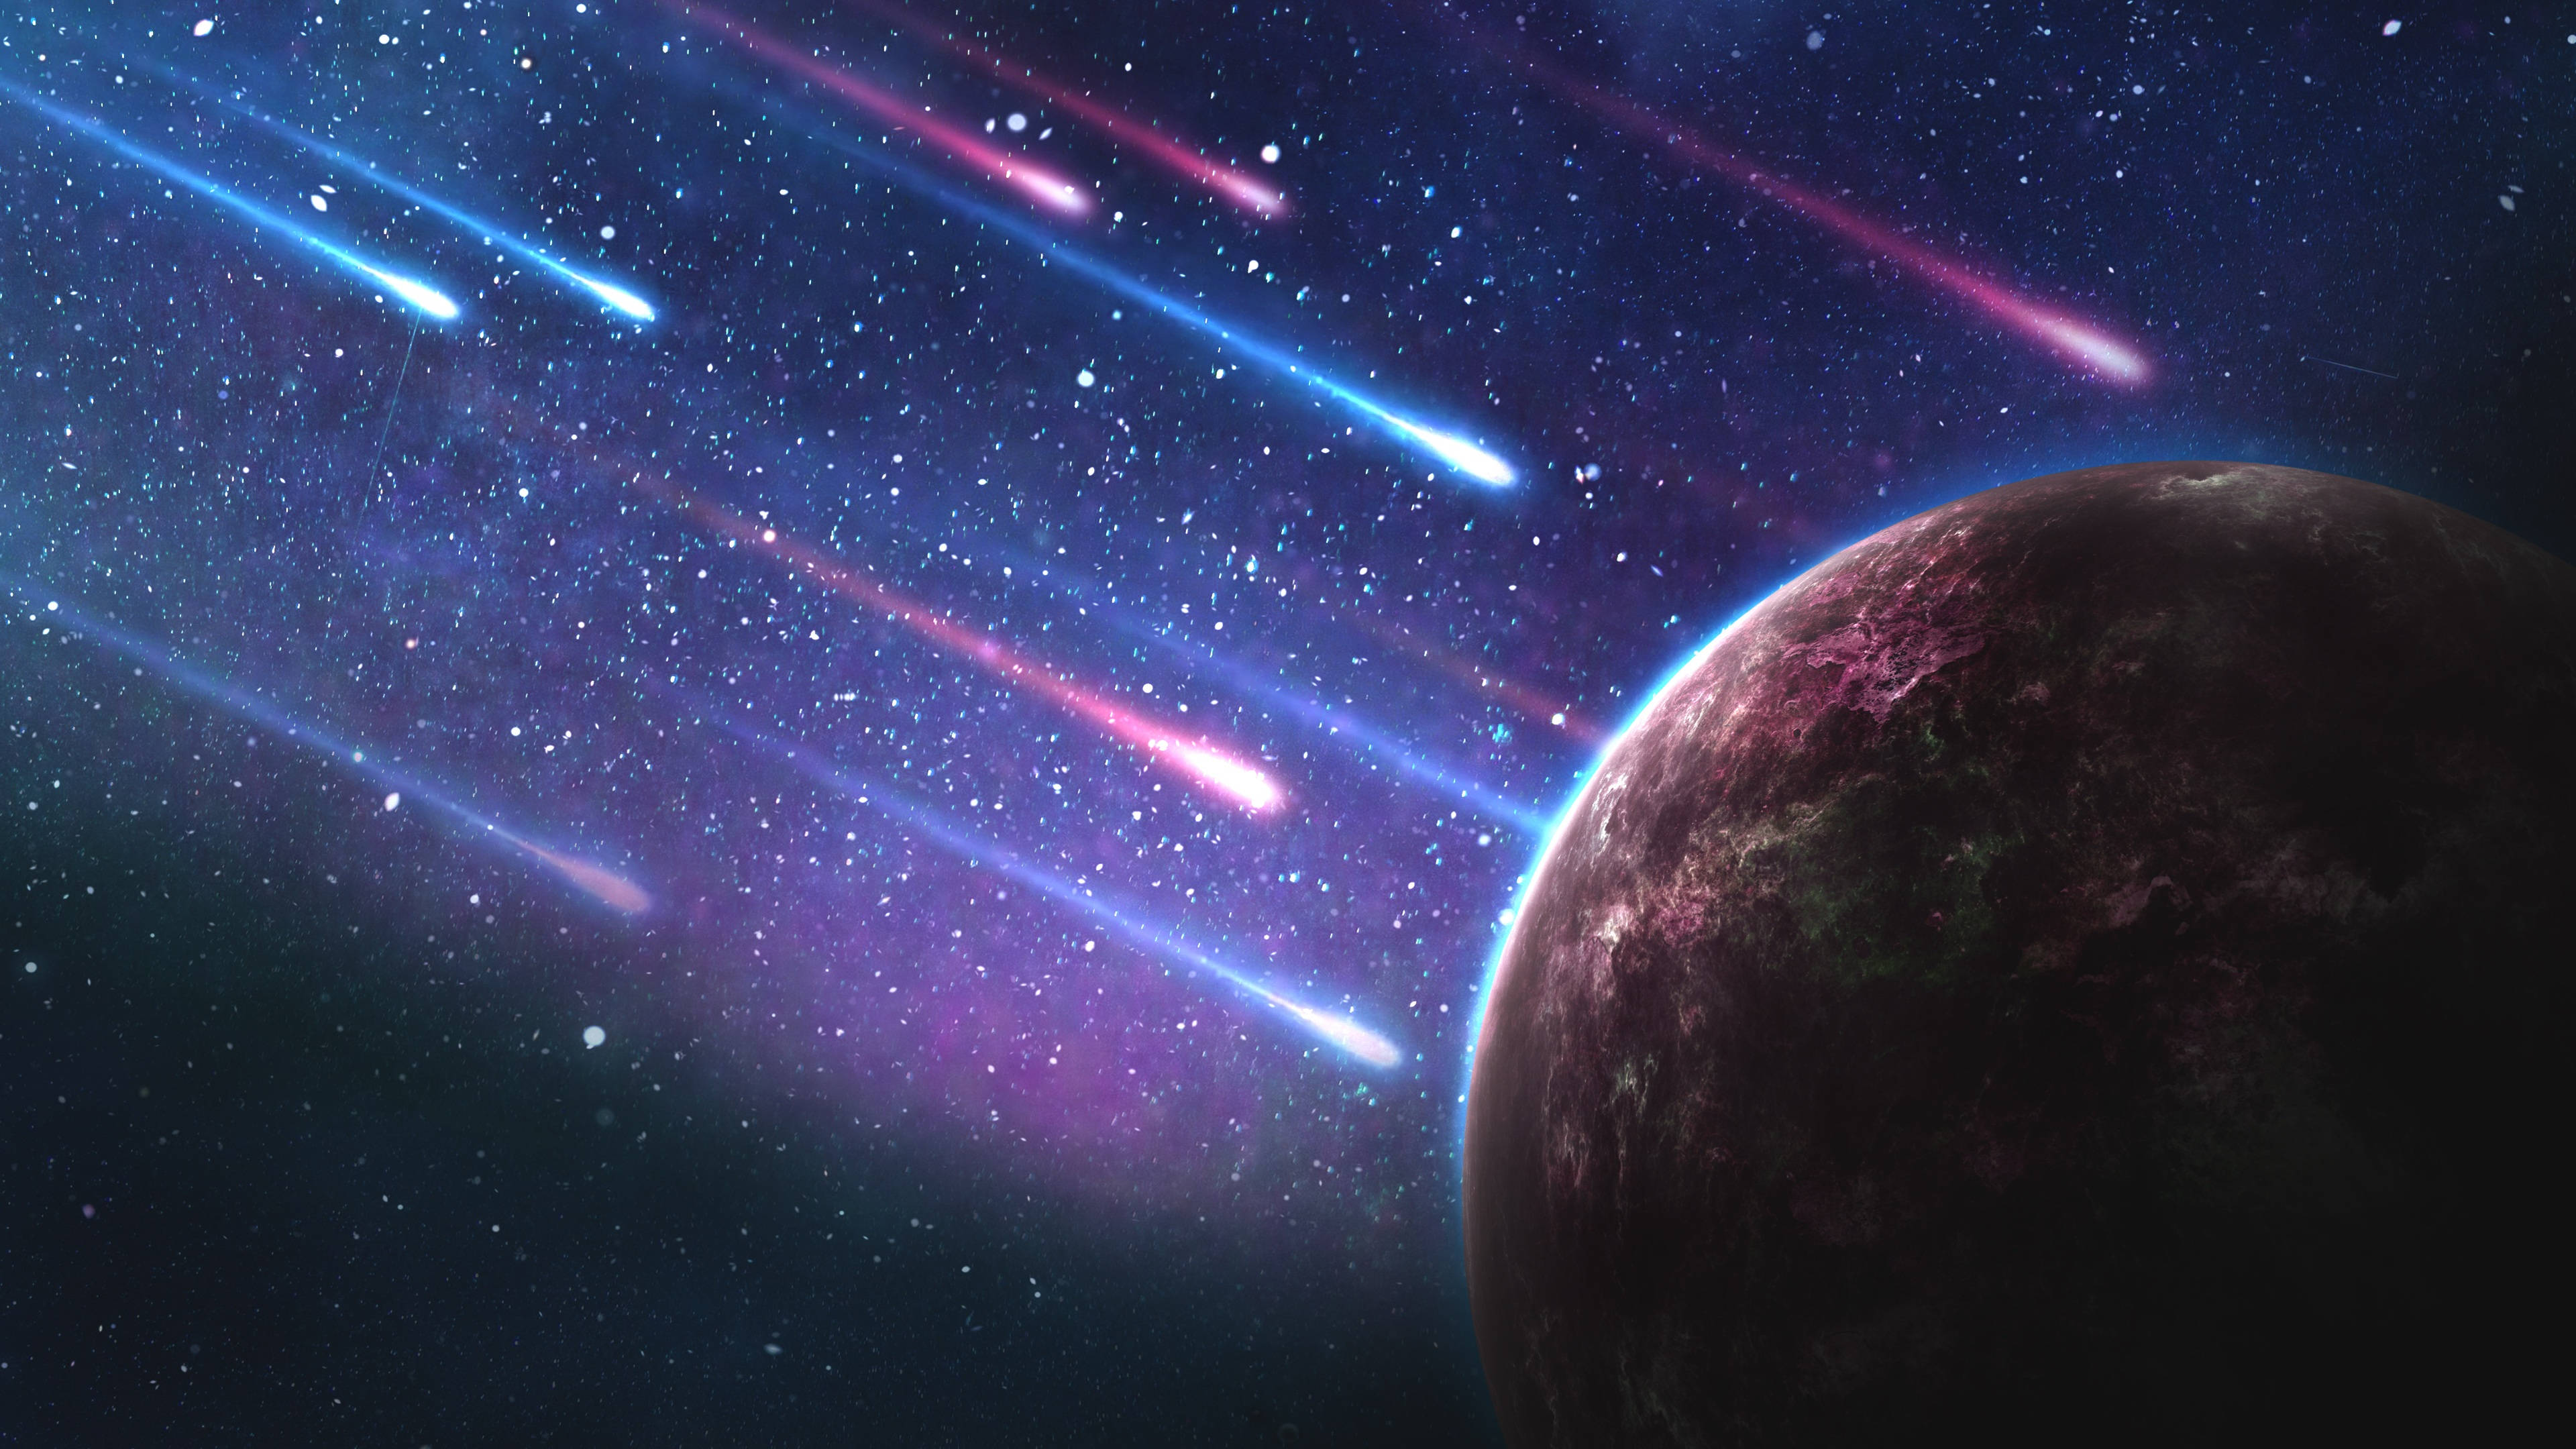 Meteors, asteroids and a planet in Colorful Galaxy Wallpaper